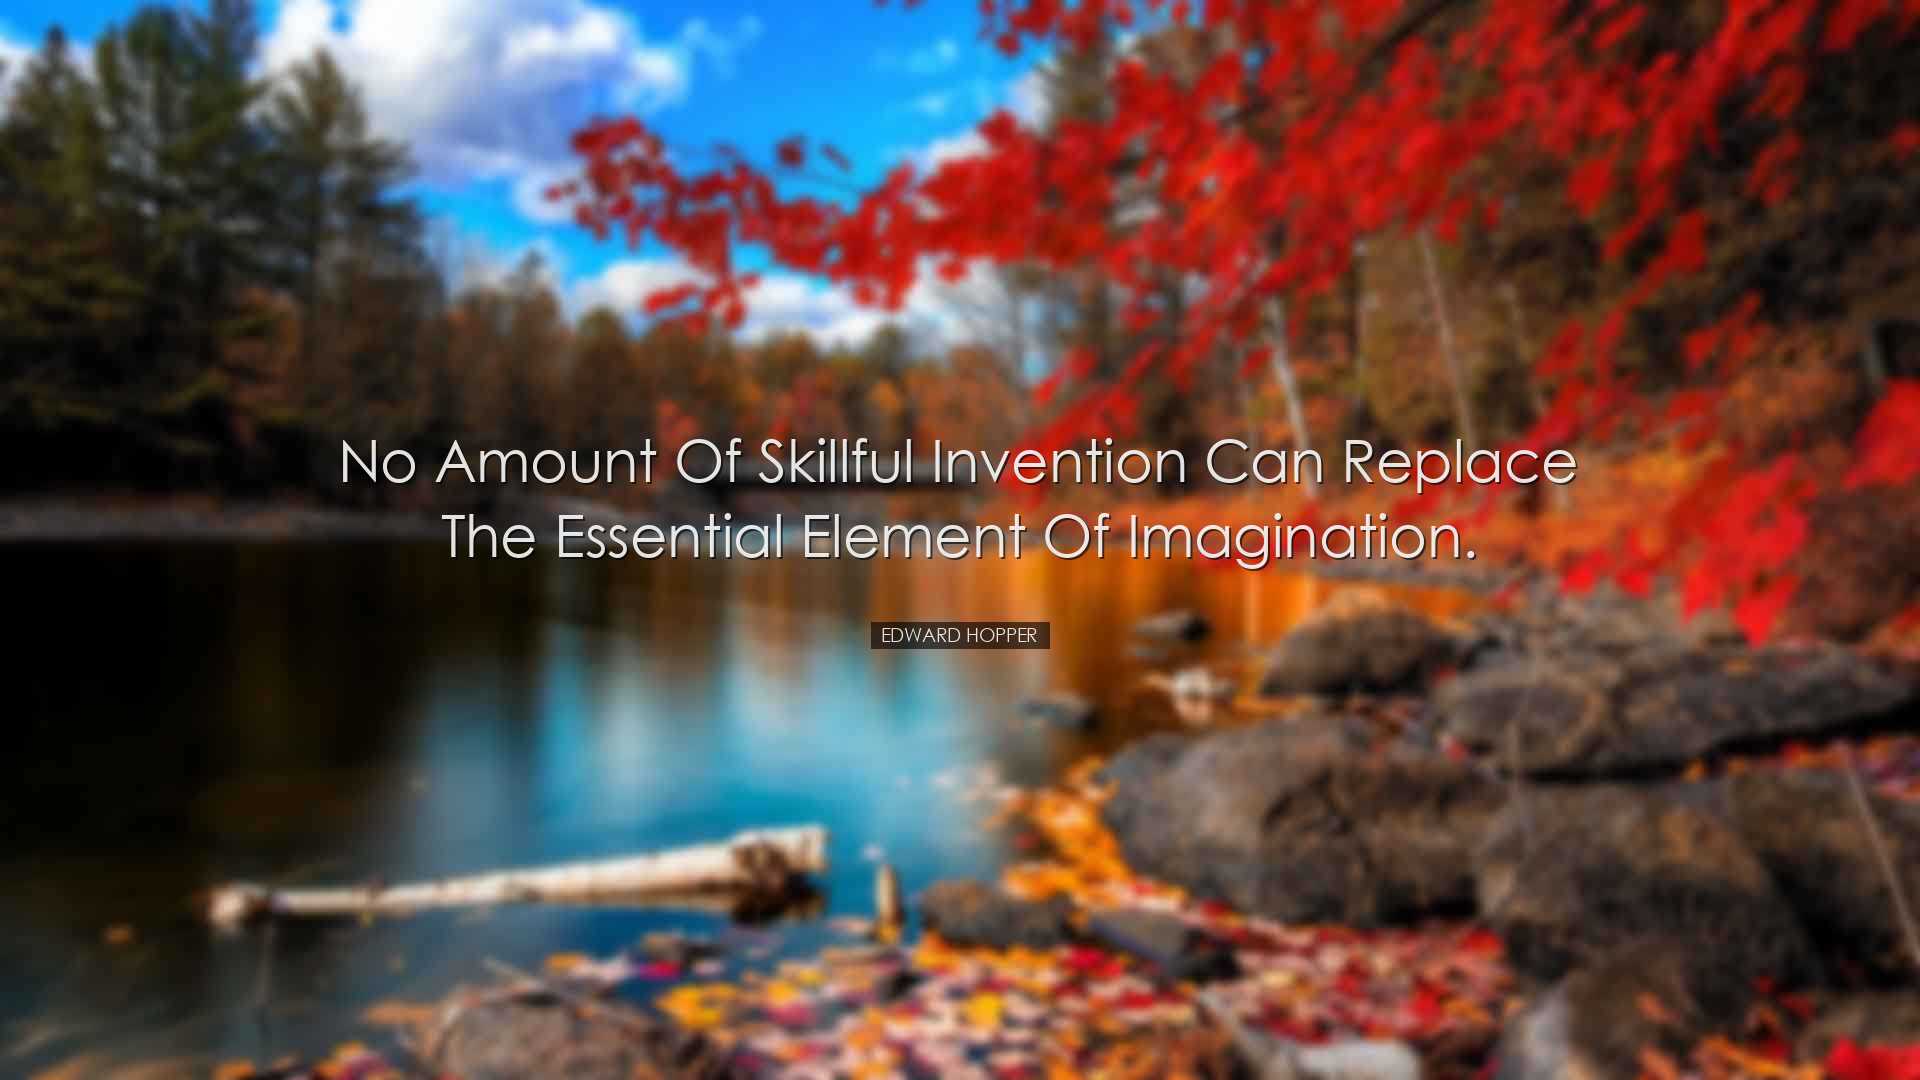 No amount of skillful invention can replace the essential element